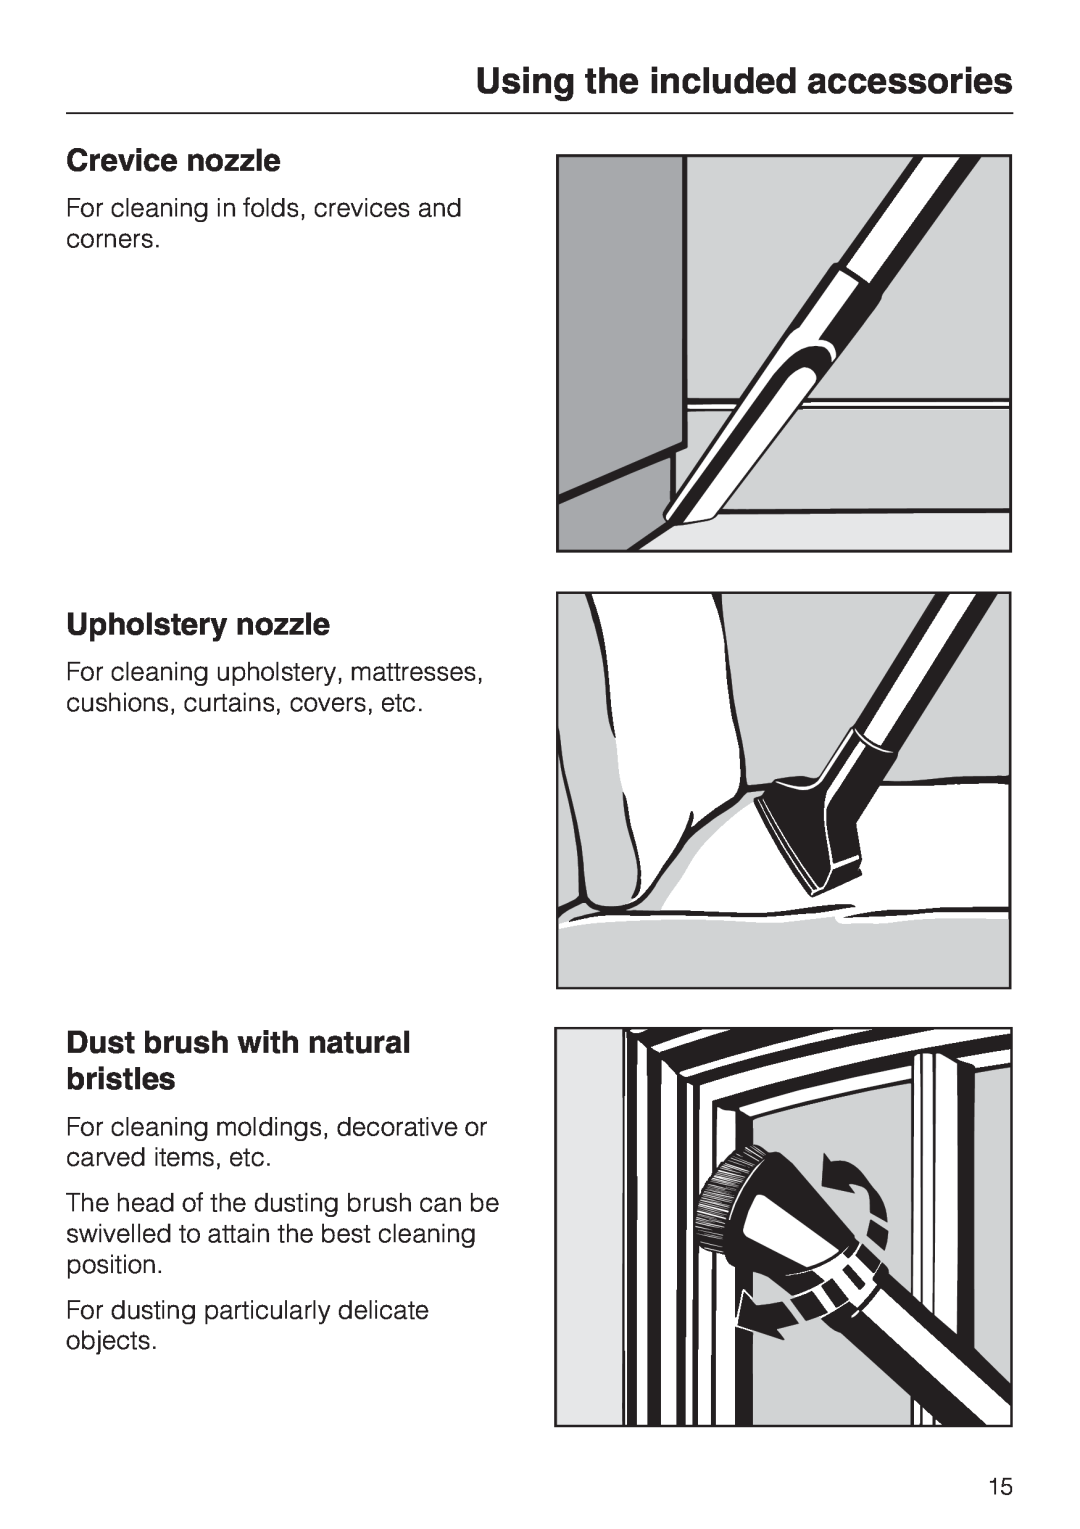 Miele S 4002 manual Using the included accessories, Crevice nozzle, Upholstery nozzle, Dust brush with natural bristles 